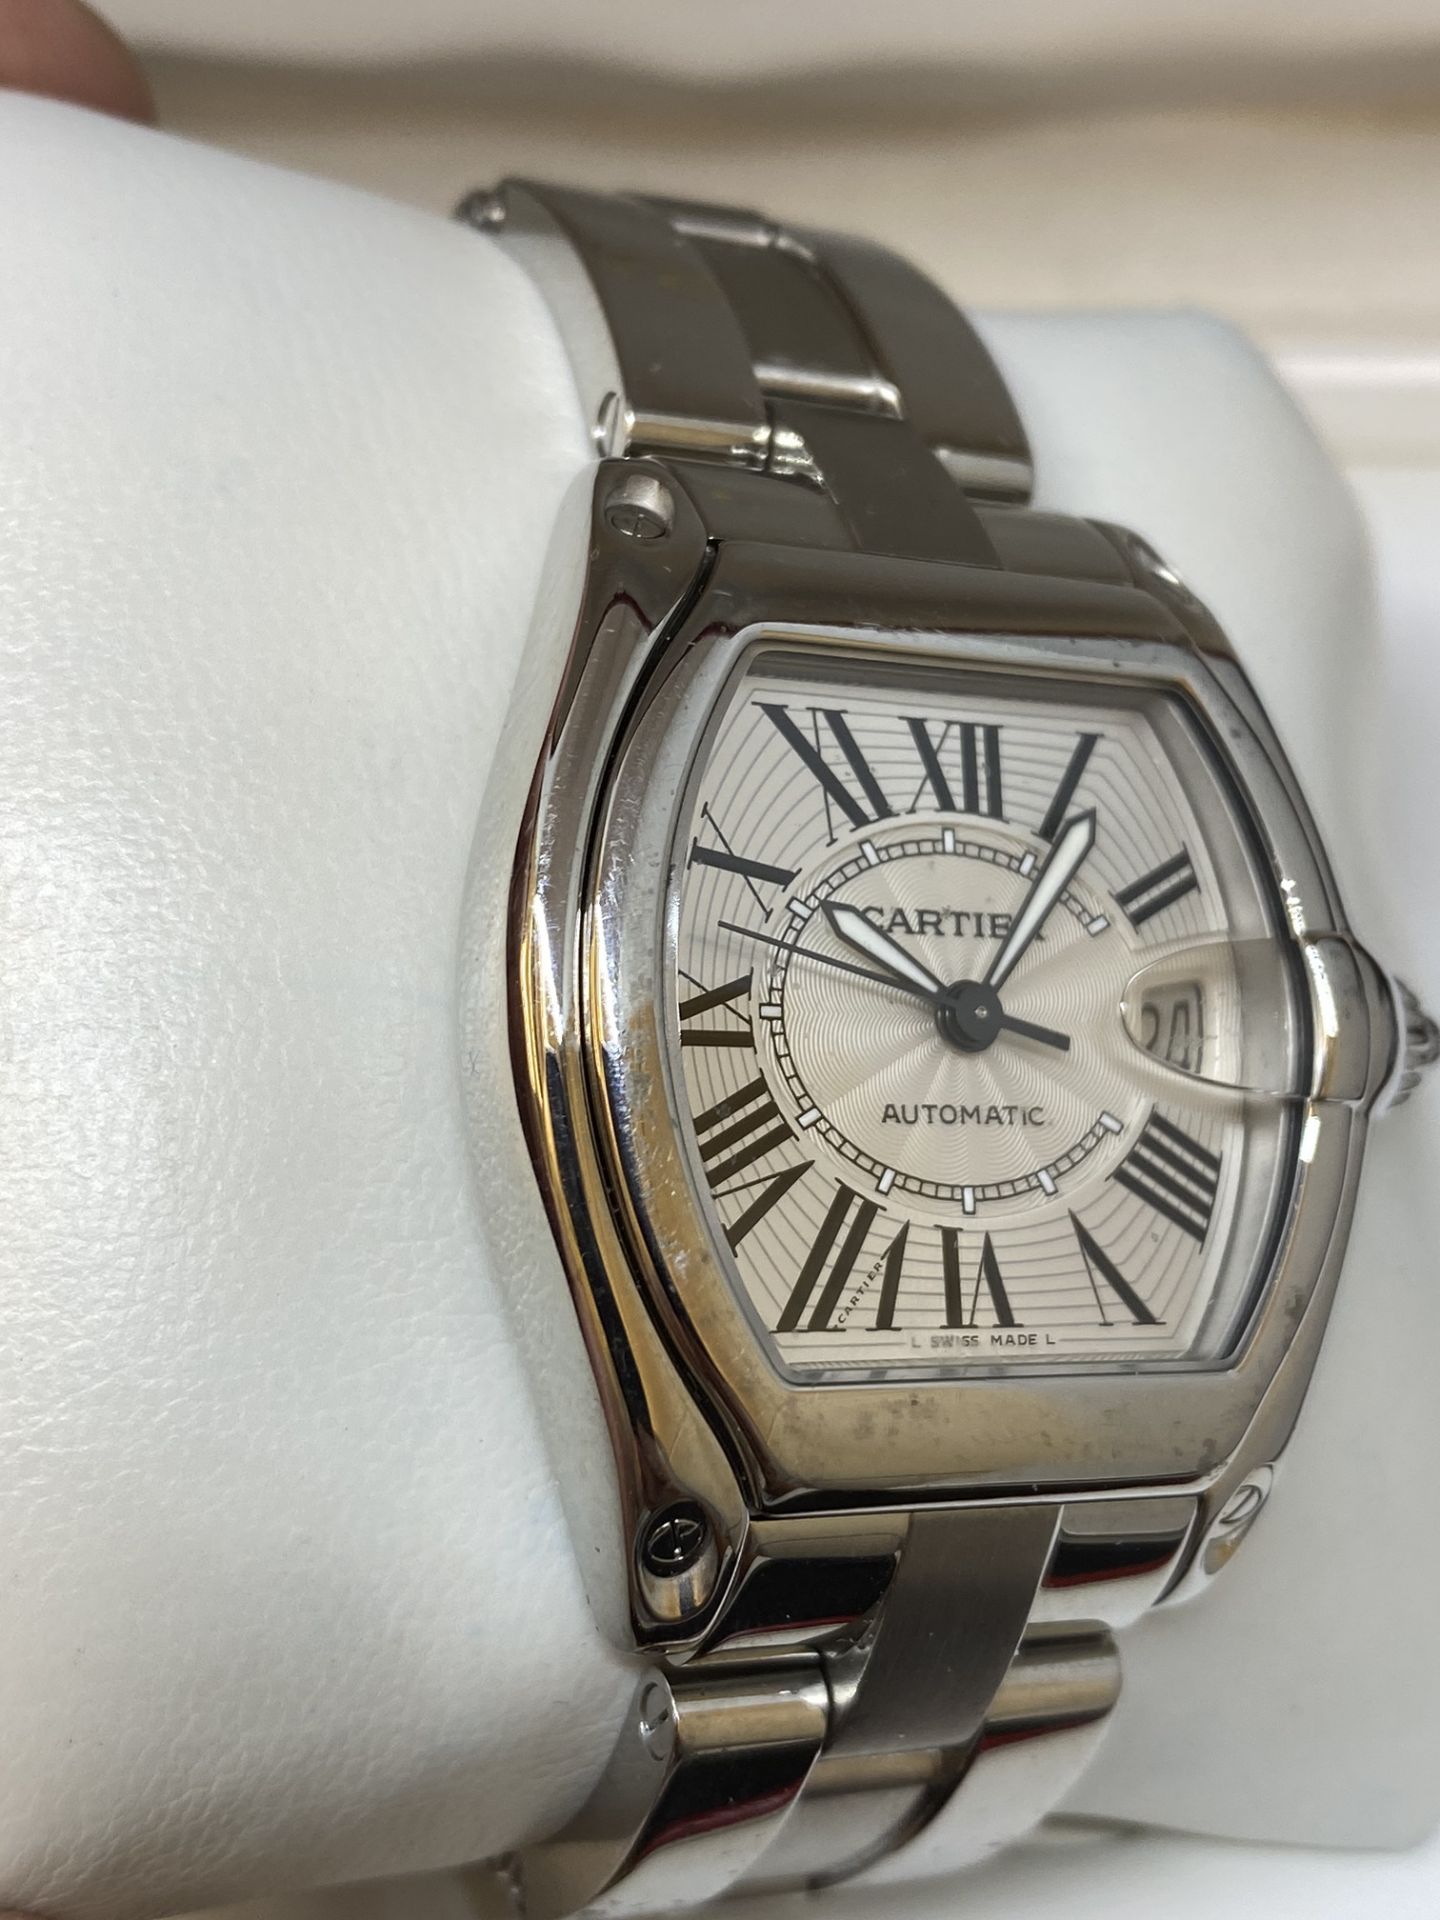 STAINLESS STEEL CARTIER ROADSTER AUTOMATIC WATCH WITH BOX - Image 6 of 11